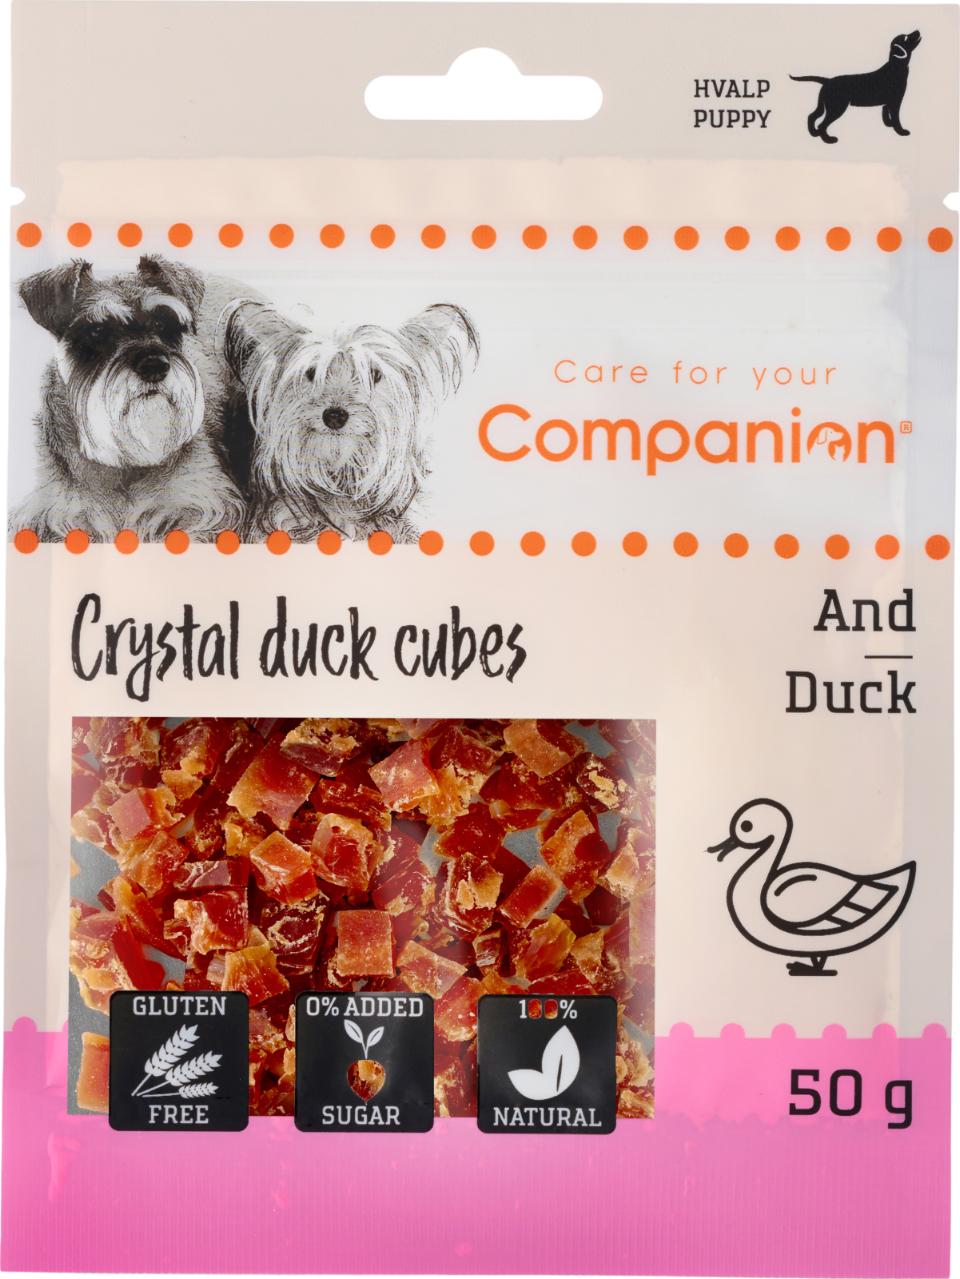 Companion Crystal Duck Cubes For Puppies - 50 g